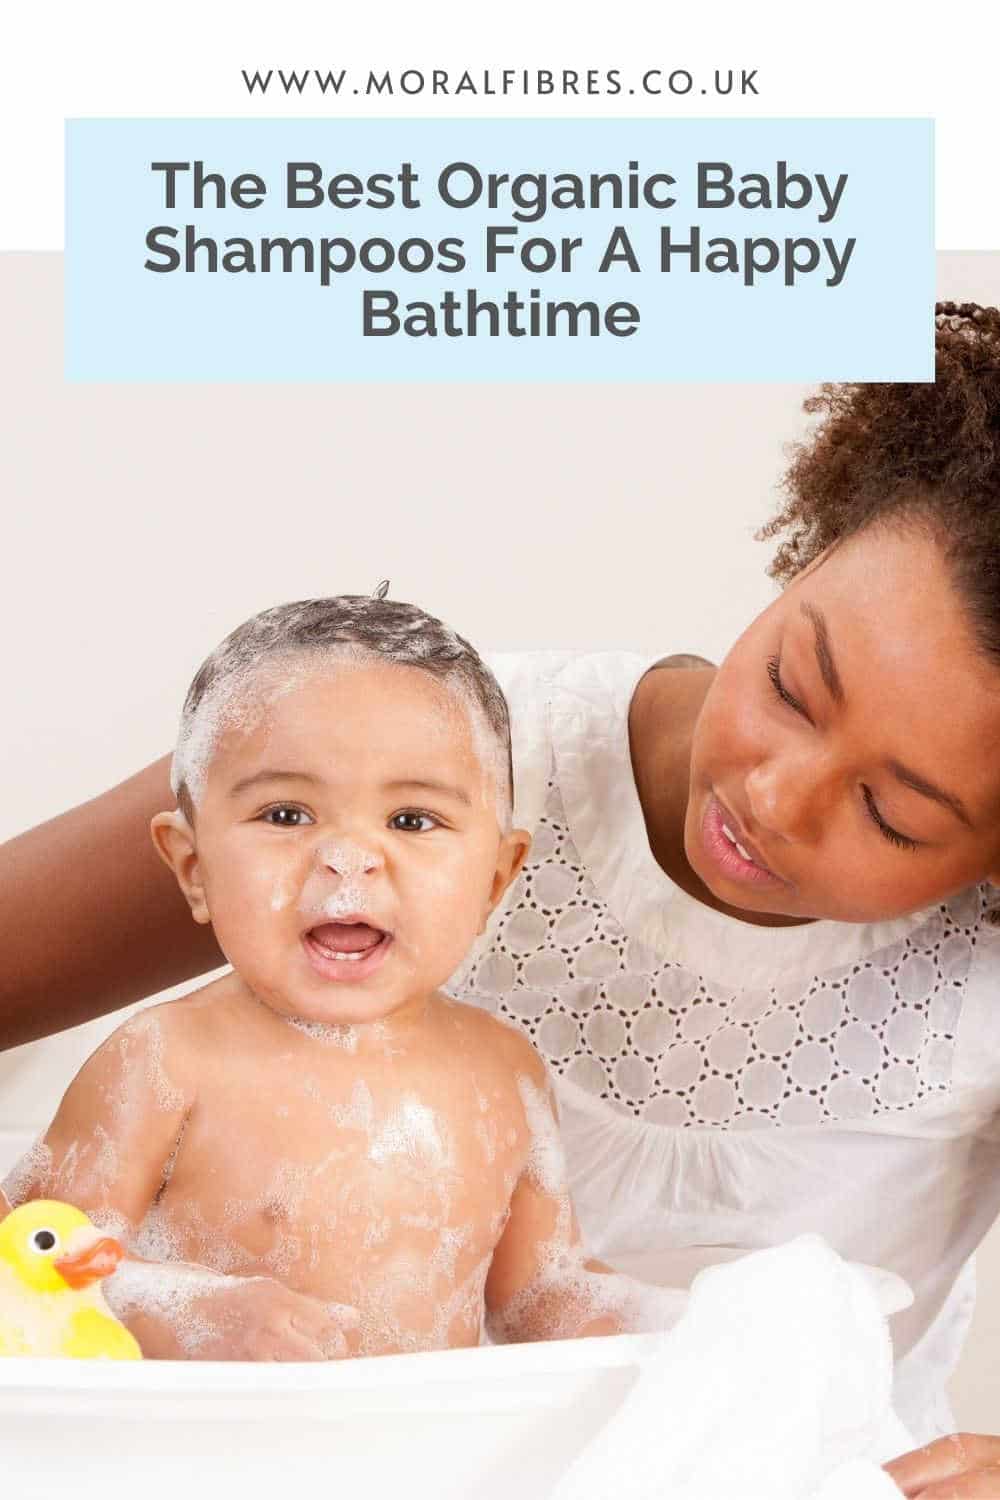 A baby being bathed, with a blue text box that says the best organic baby shampoo for a happy bath time.